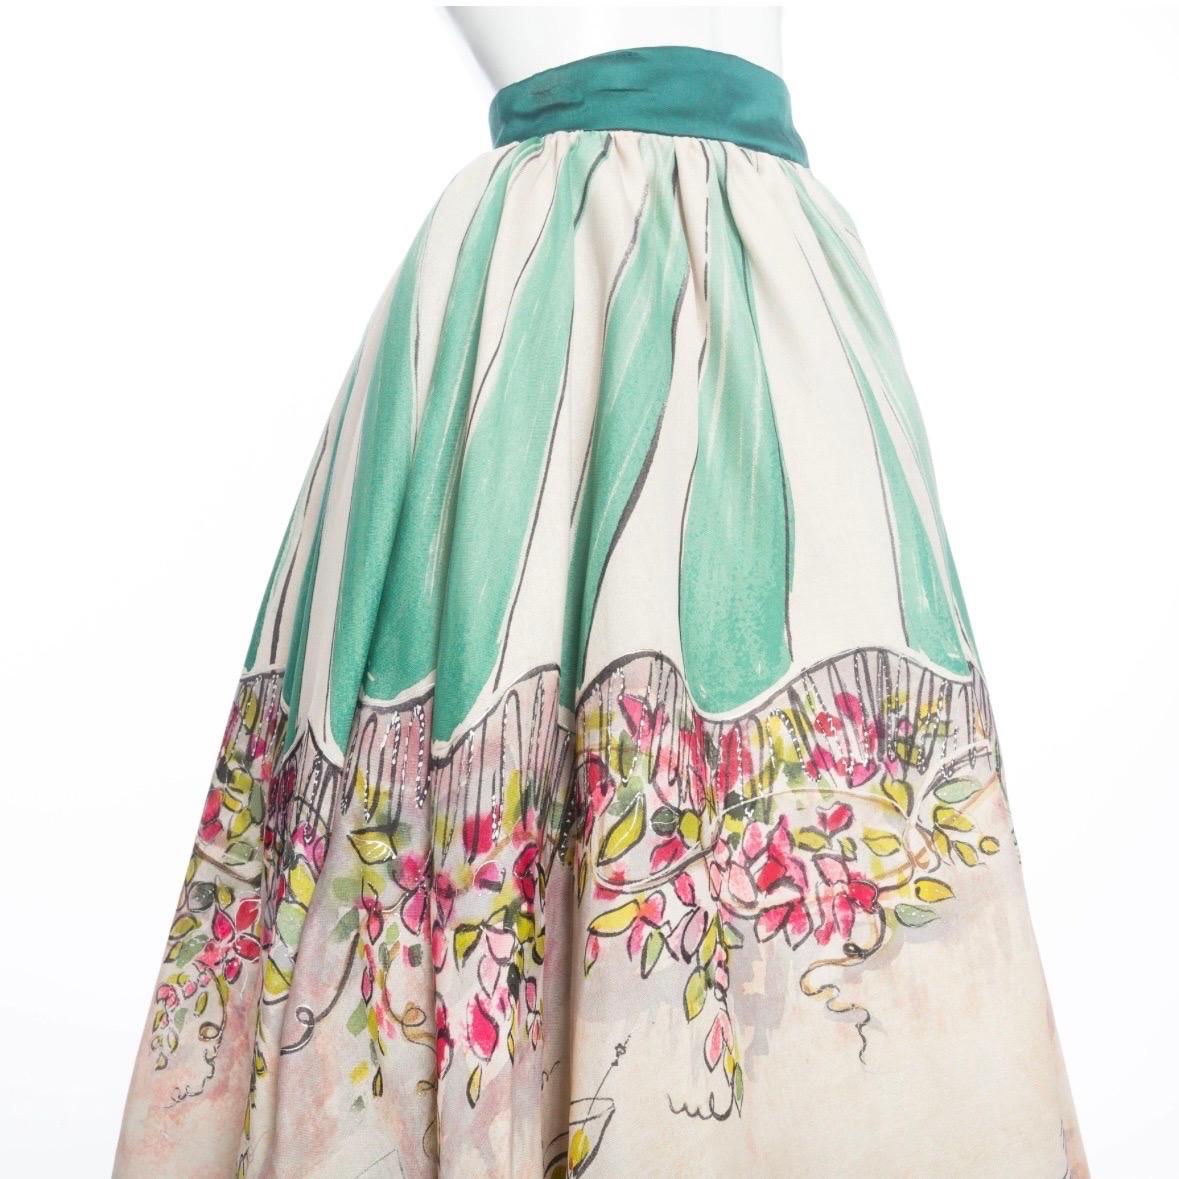  Perry Ellis 1992 Hand-Painted Cotton Organdy Full Skirt

Marc Jacobs' SS1992 collection for Perry Ellis was inspired by Beverly Hills, Malibu, Los Angeles and Hollywood and featured several hand-painted cotton organdy skirts. Christy Turlington